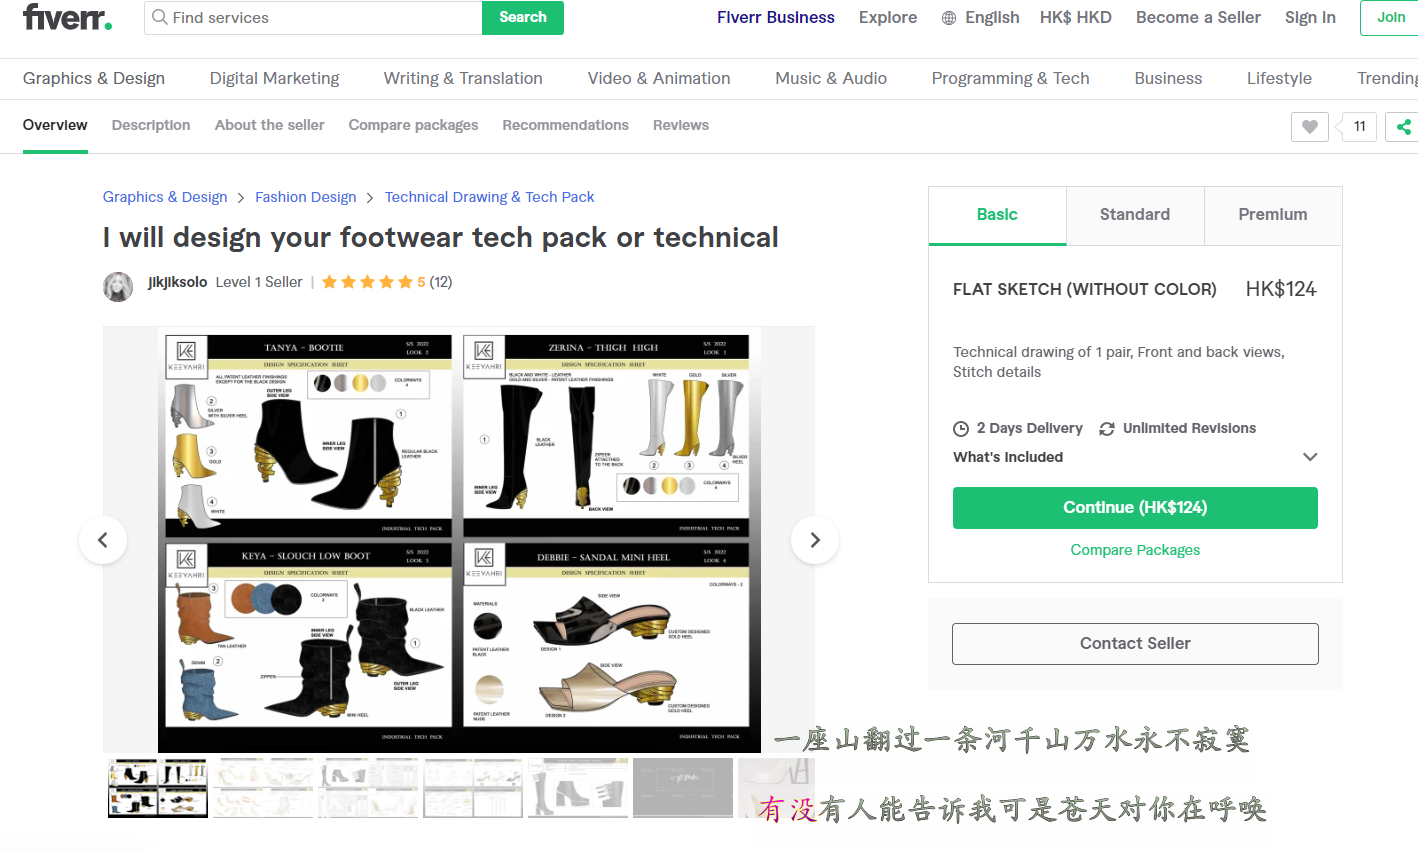 https://www. fiverr.com/jikjiksolo/design-your-footwear-tech-pack-or-technical?utm_campaign=ios_delivery&utm_medium=shared&utm_source=&utm_term=